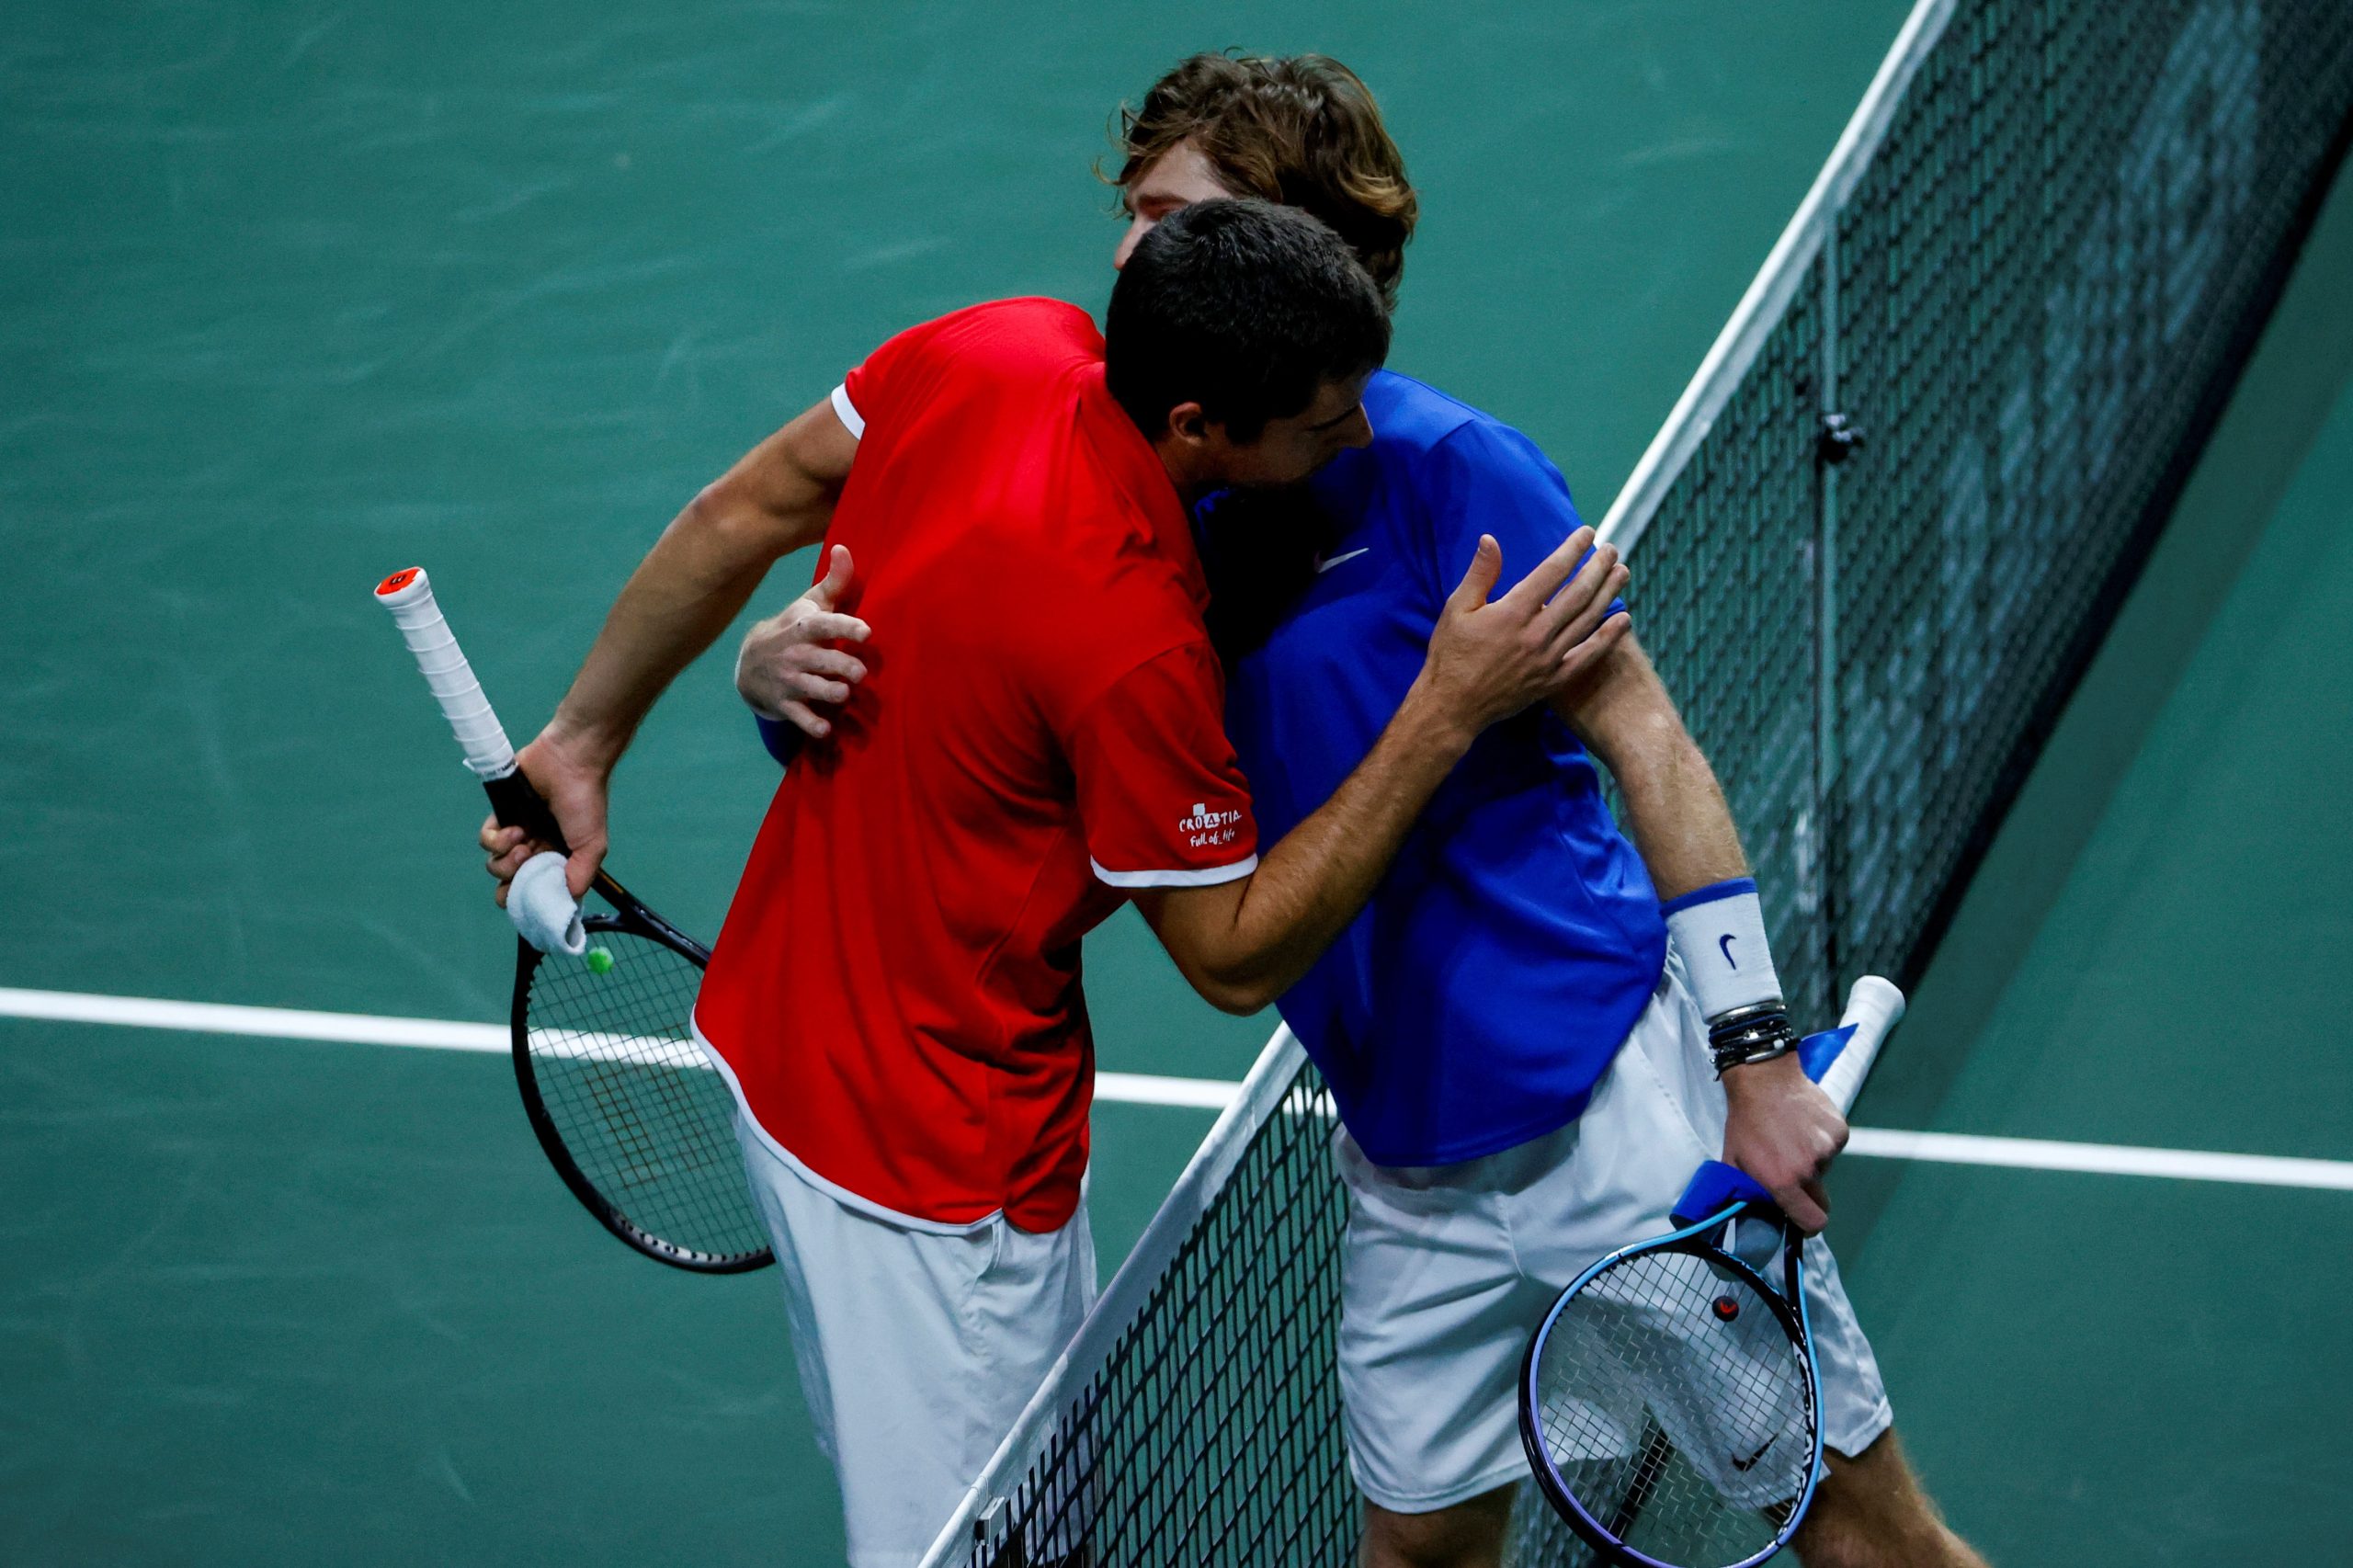 epa09624273 Andrey Rublev (R) of Russia is congratulated by Borna Gojo (L) of Croatia after winning their singles match during the Davis Cup Final between Russia and Croatia in Madrid, Spain, 05 December 2021.  EPA/Emilio Naranjo